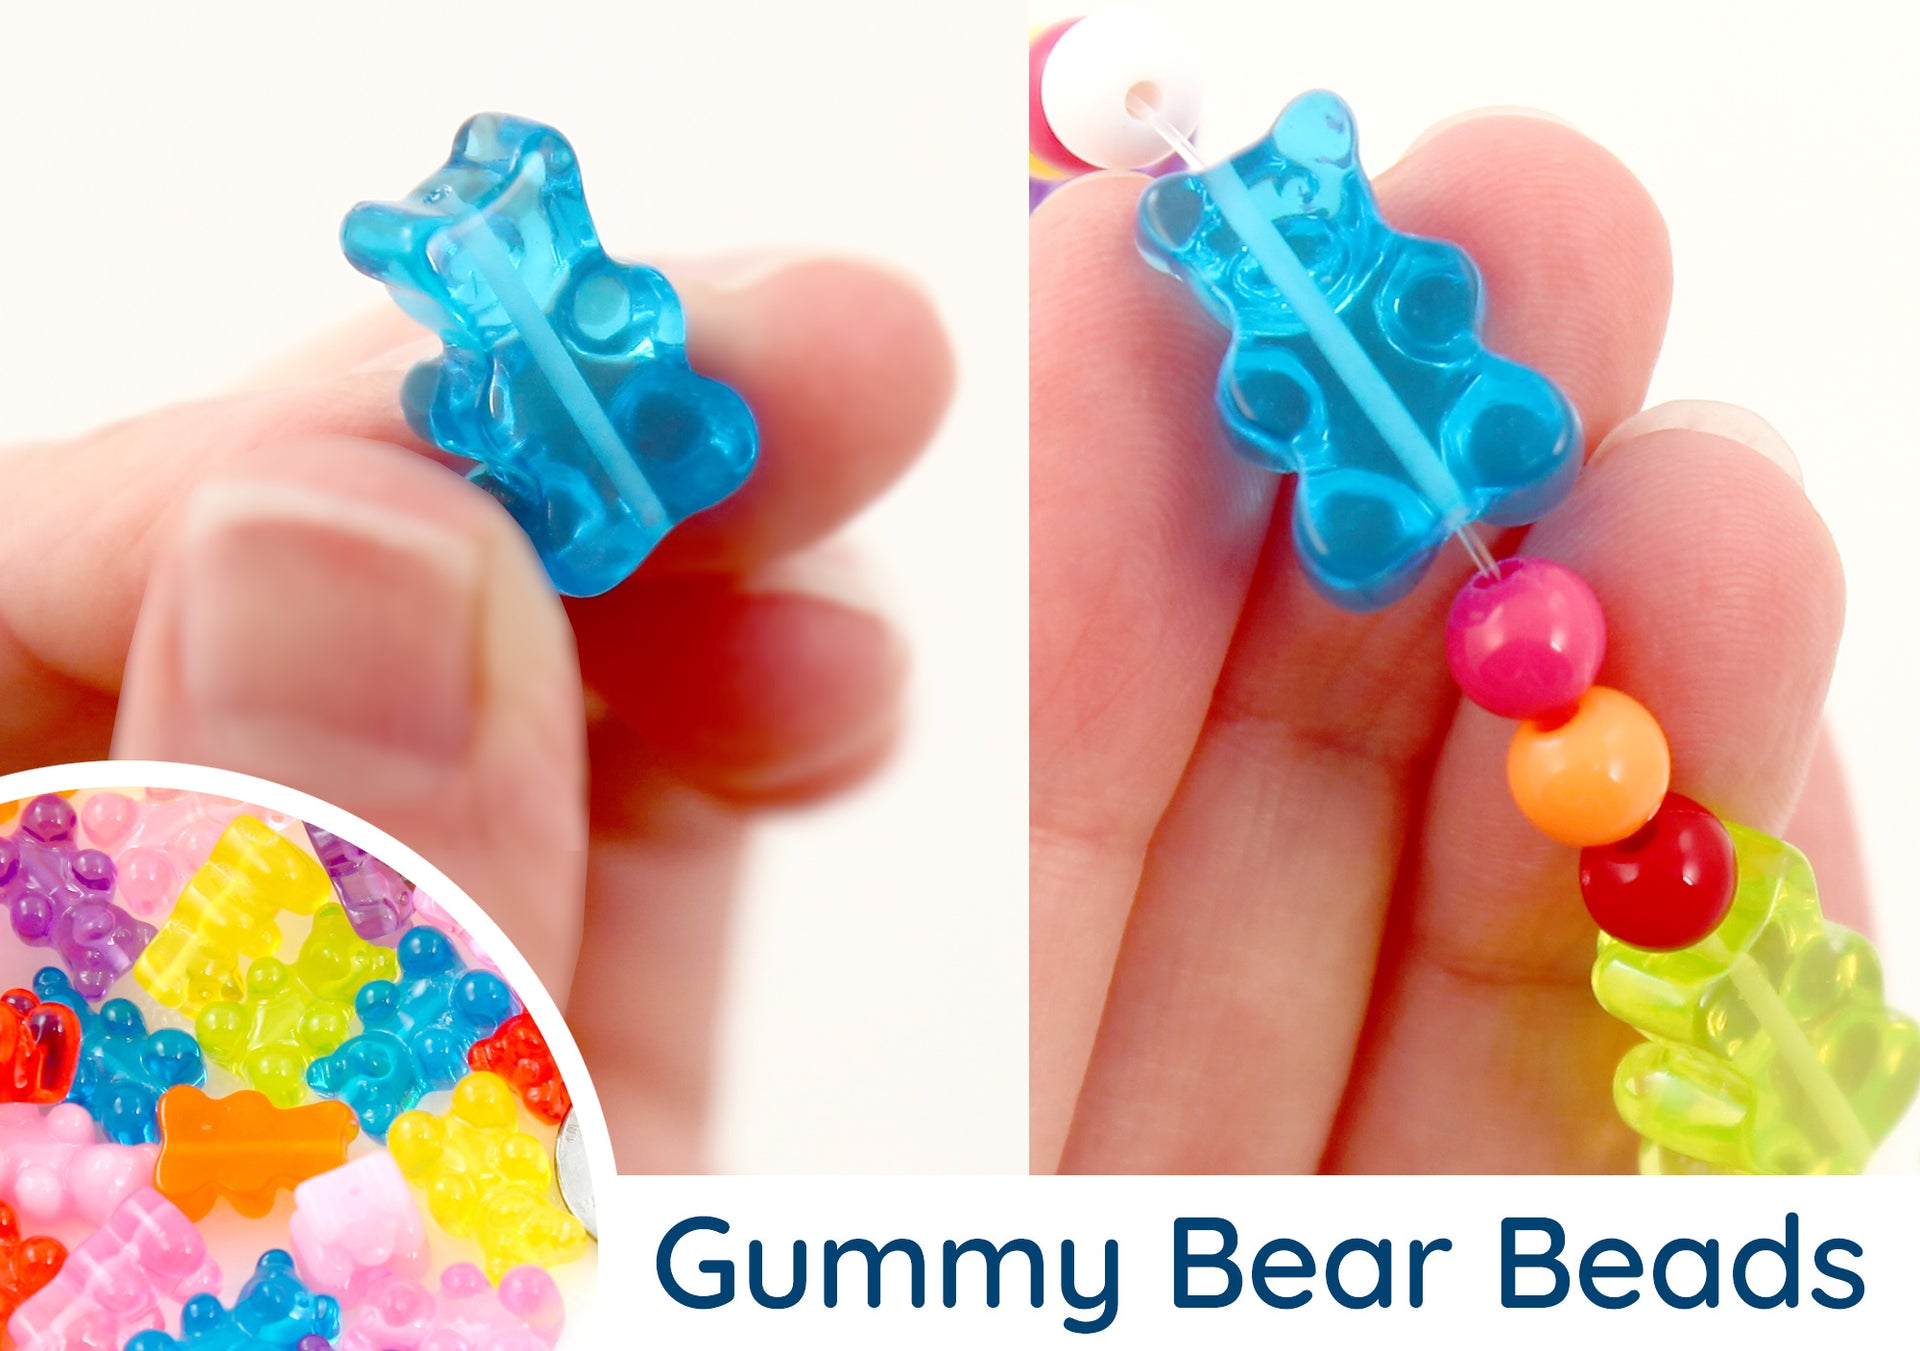 Gummy Bear Beads - 17mm Fake Gummy Bears with Hole for